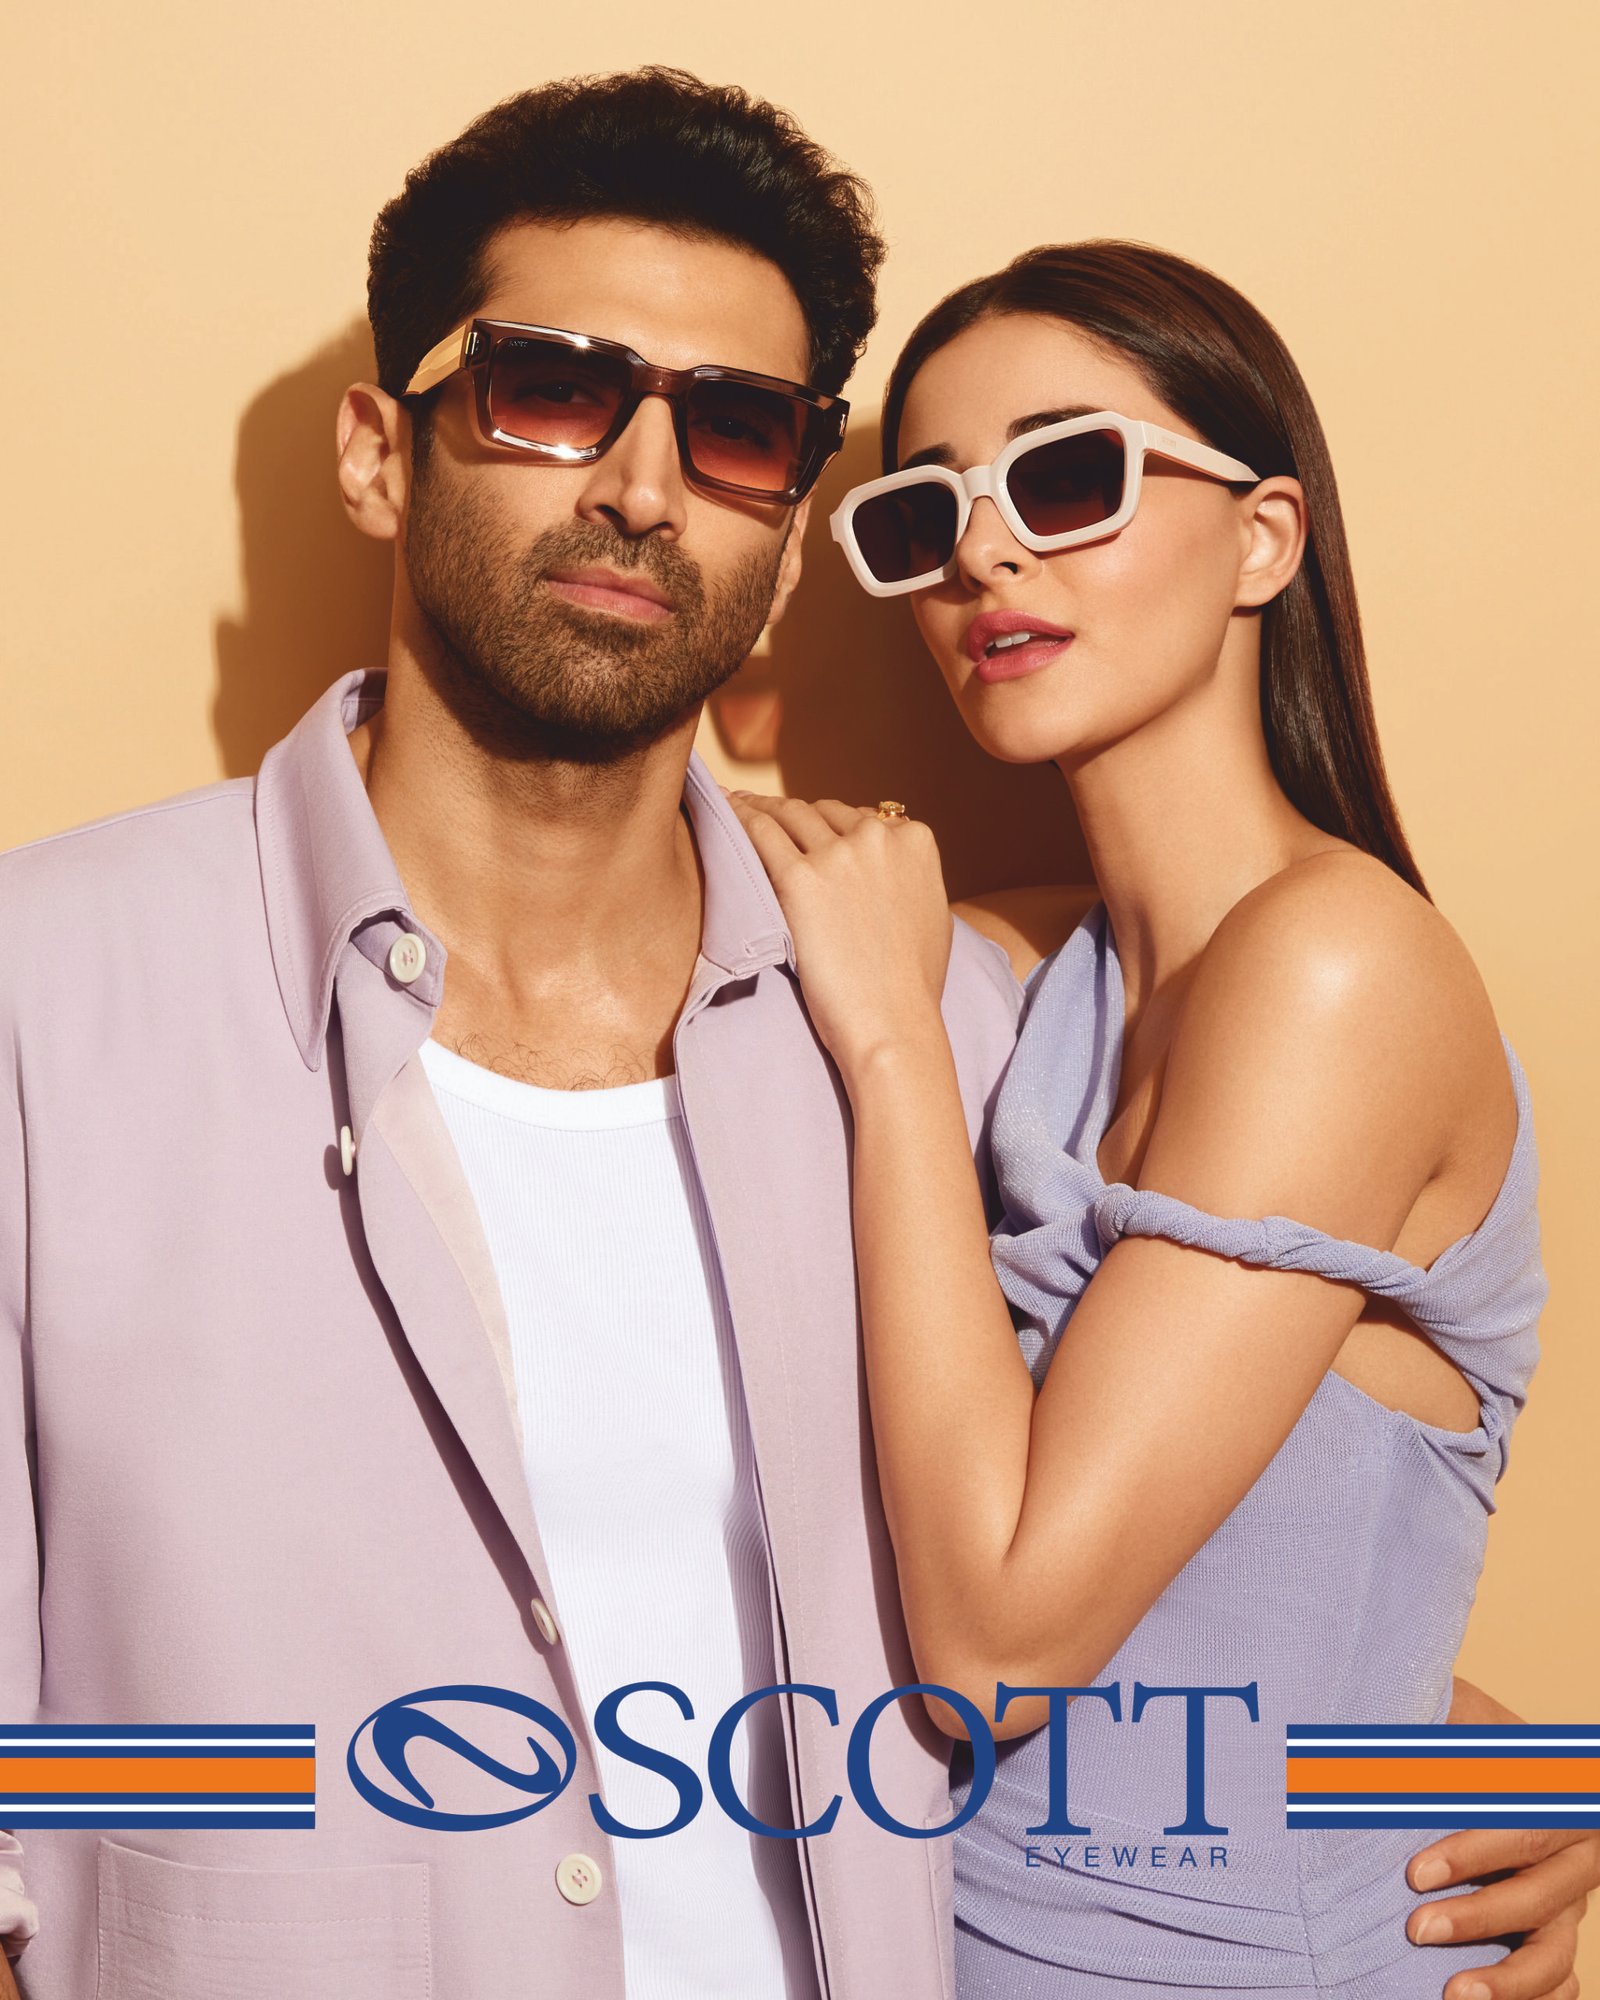 “Unveiling Glamour: Scott Eyewear’s SS ’24 Collection Shines with Aditya Roy Kapur and Ananya Panday”